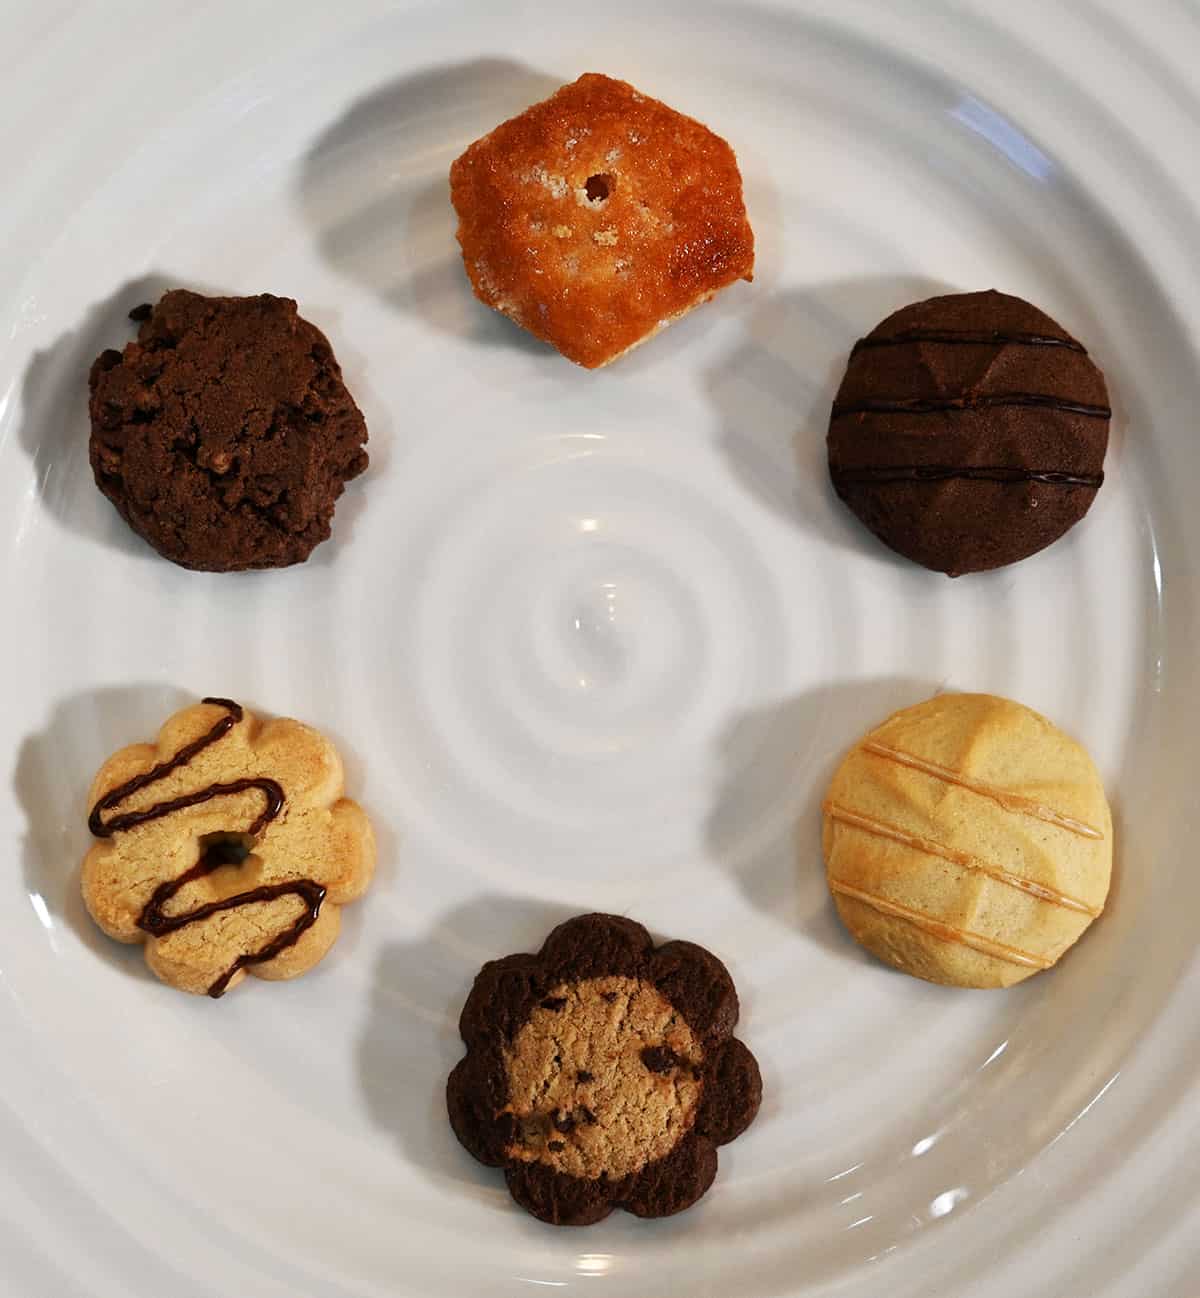 The six different kinds of cookies served on a white plate in a circle, closeup image showing what each cookie looks like.